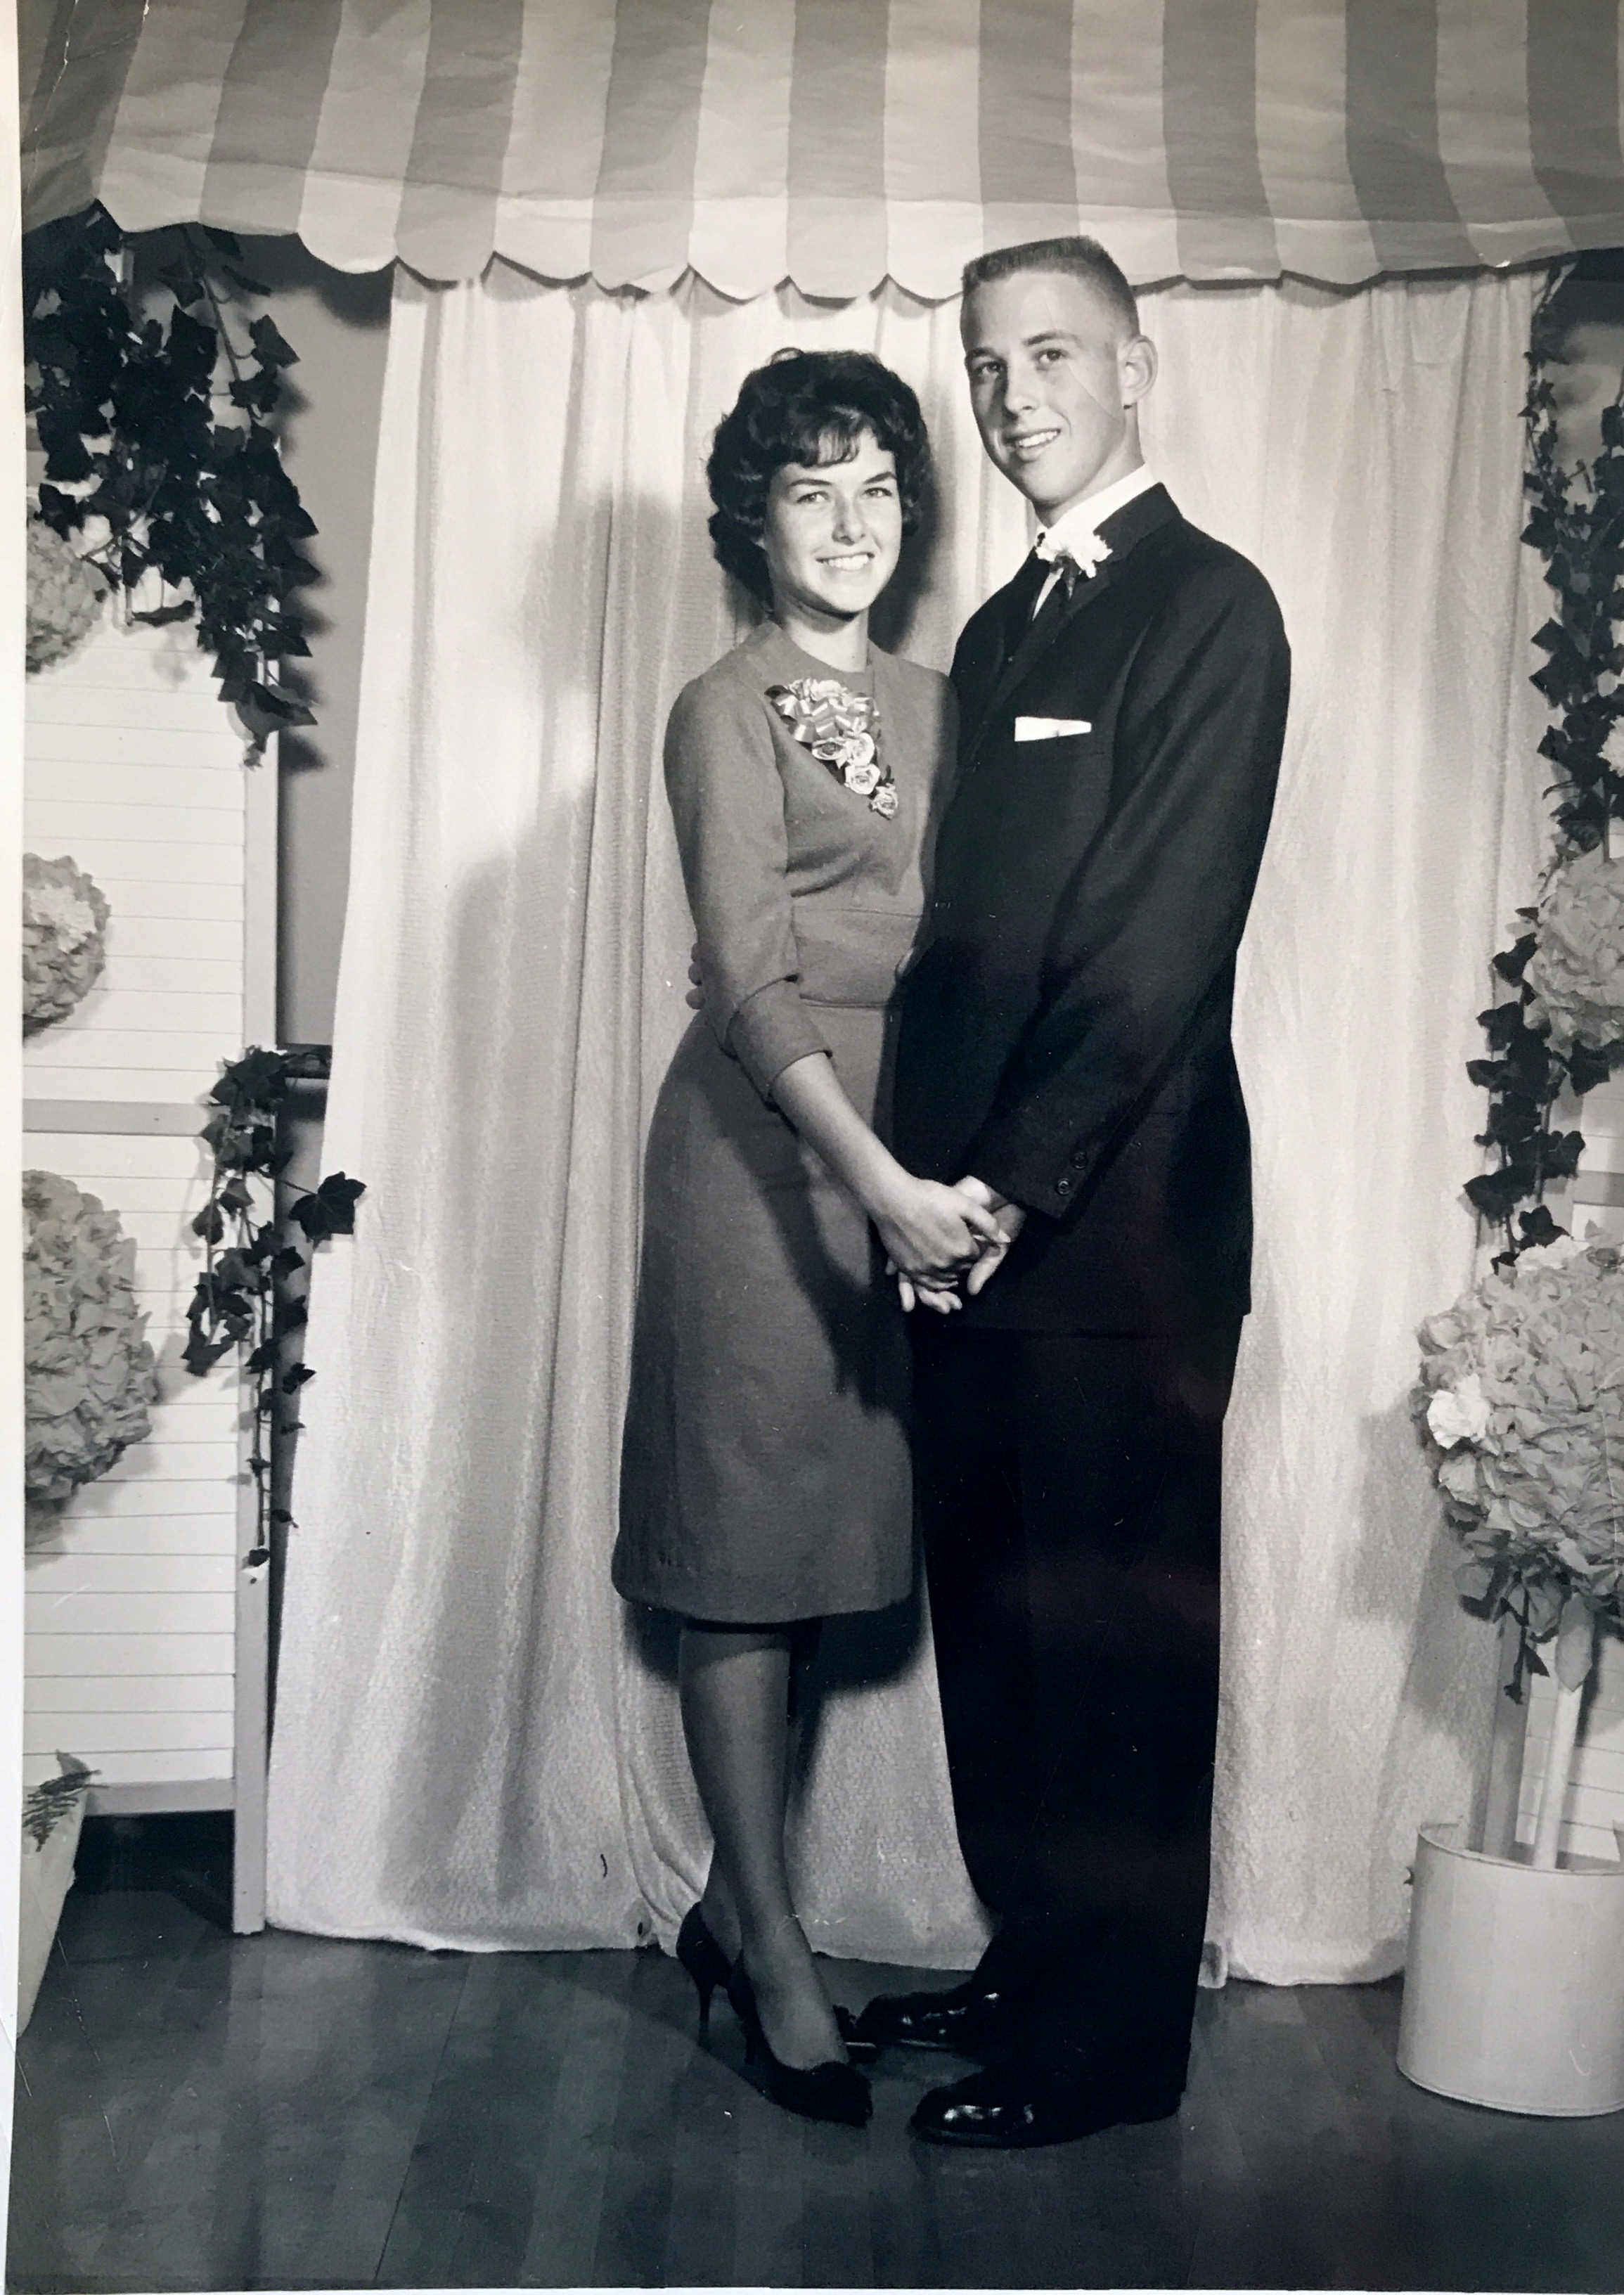 1960 high school function - Don Campbell